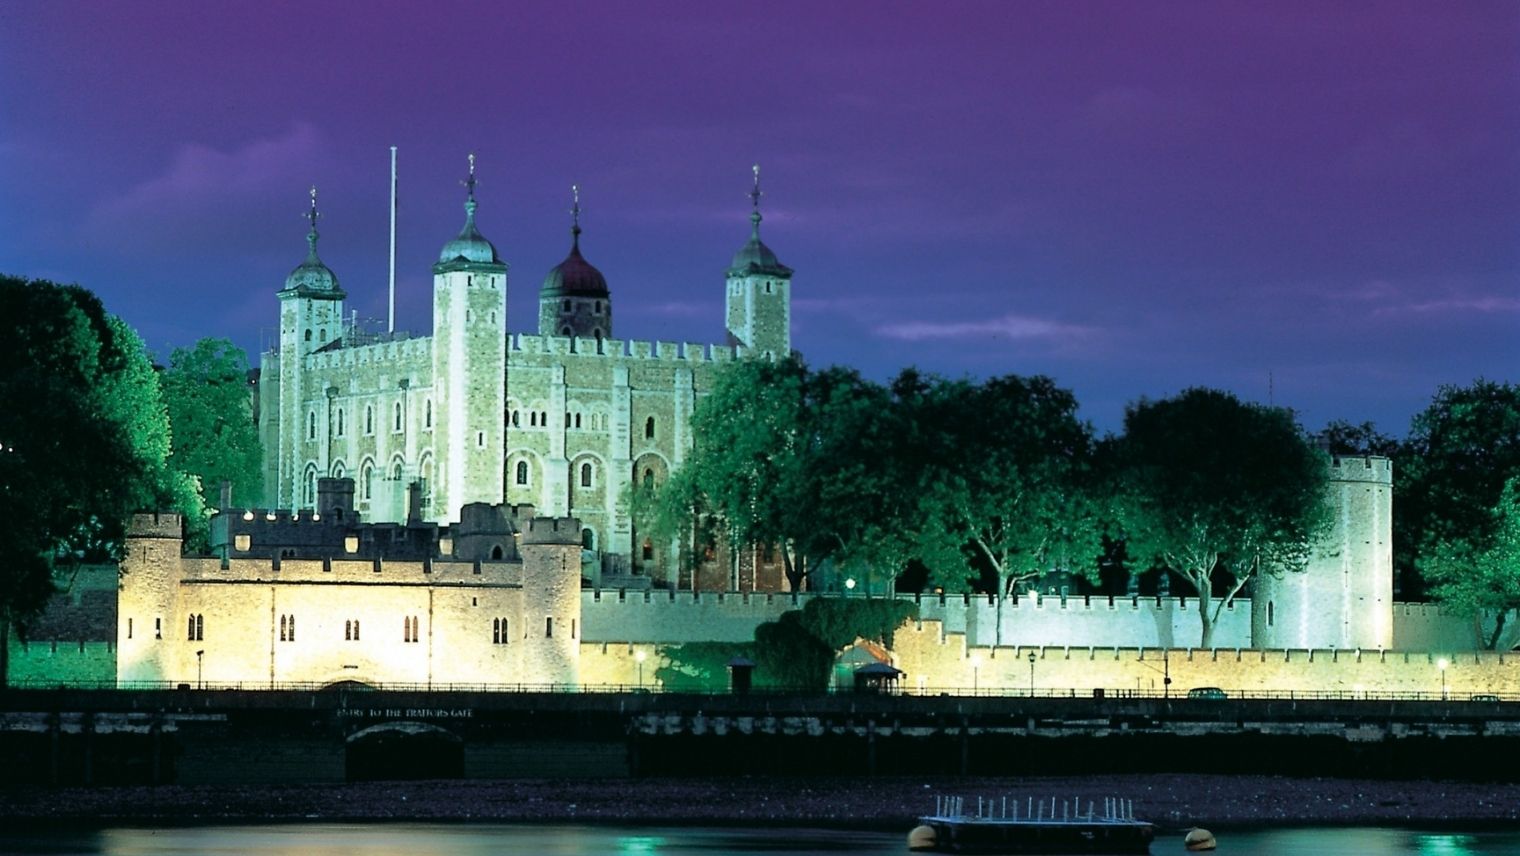 The Tower of London at night, seen from the south bank of the Thames